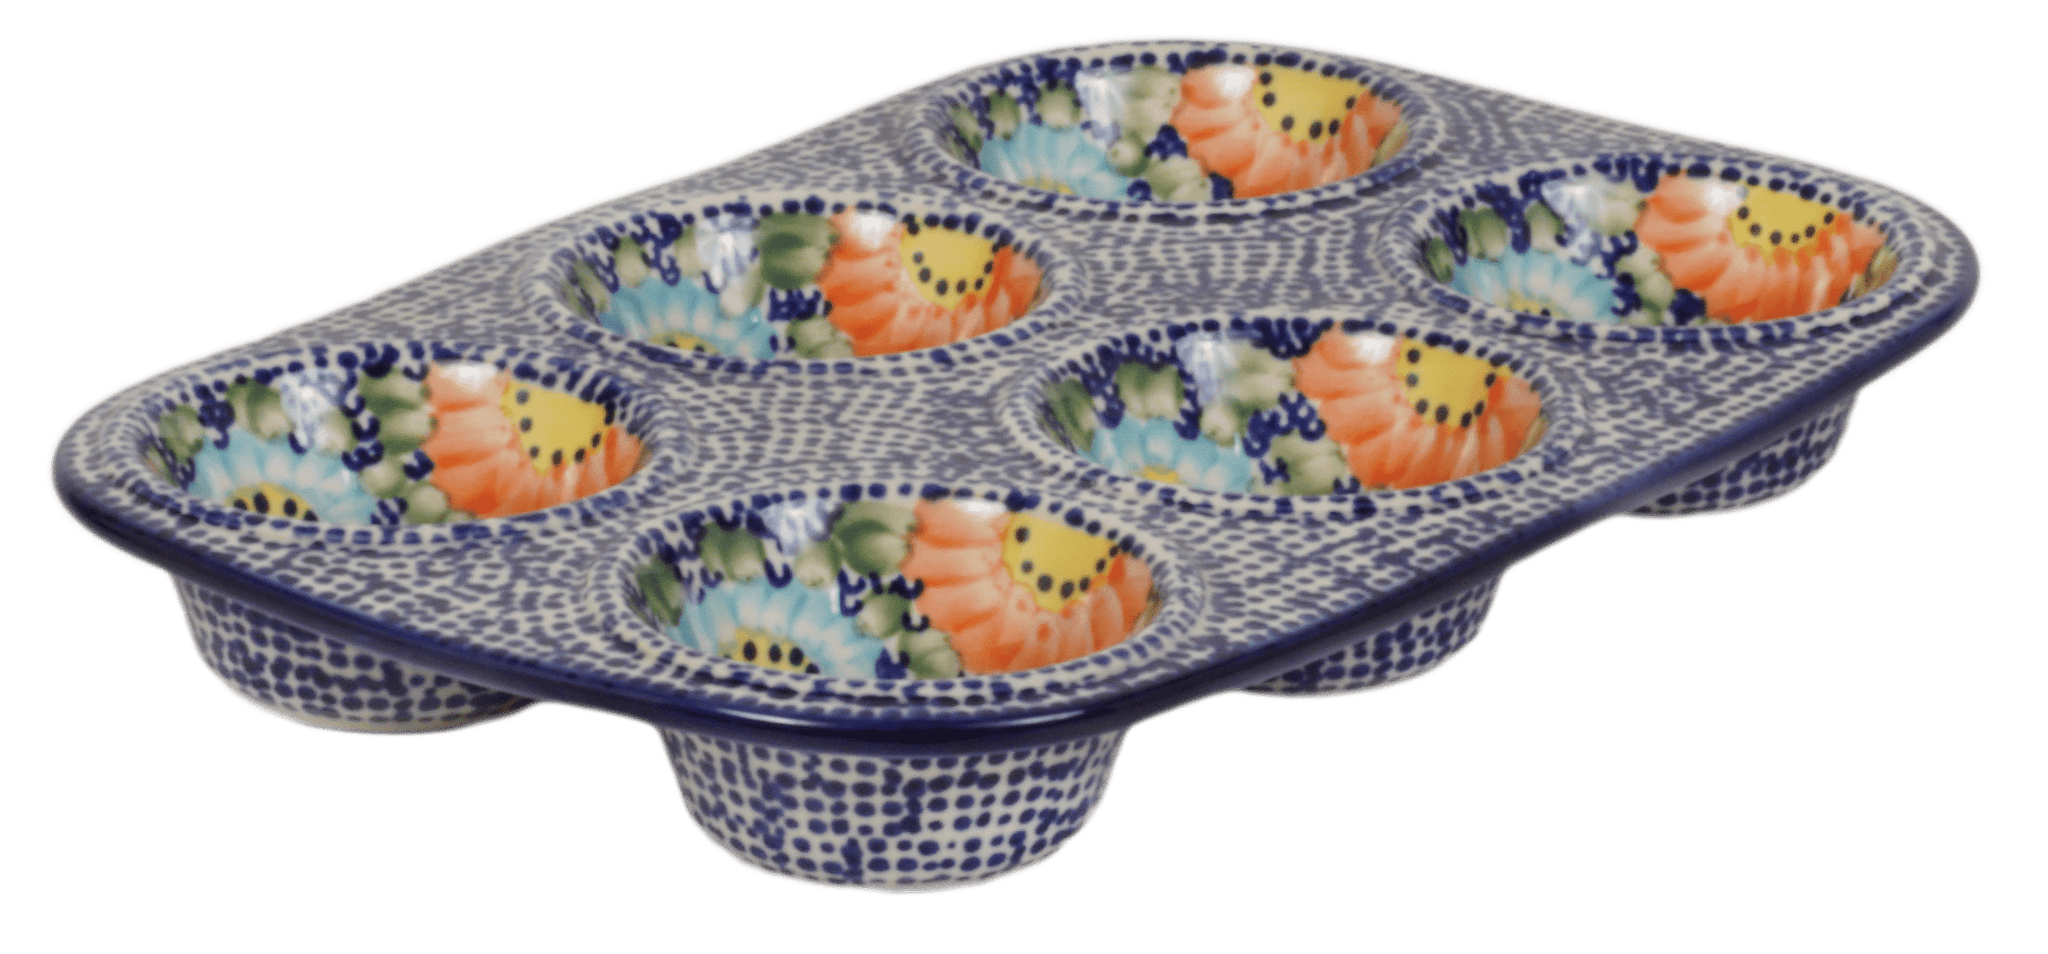 Polish Pottery - Muffin Pan - Fiesta - The Polish Pottery Outlet